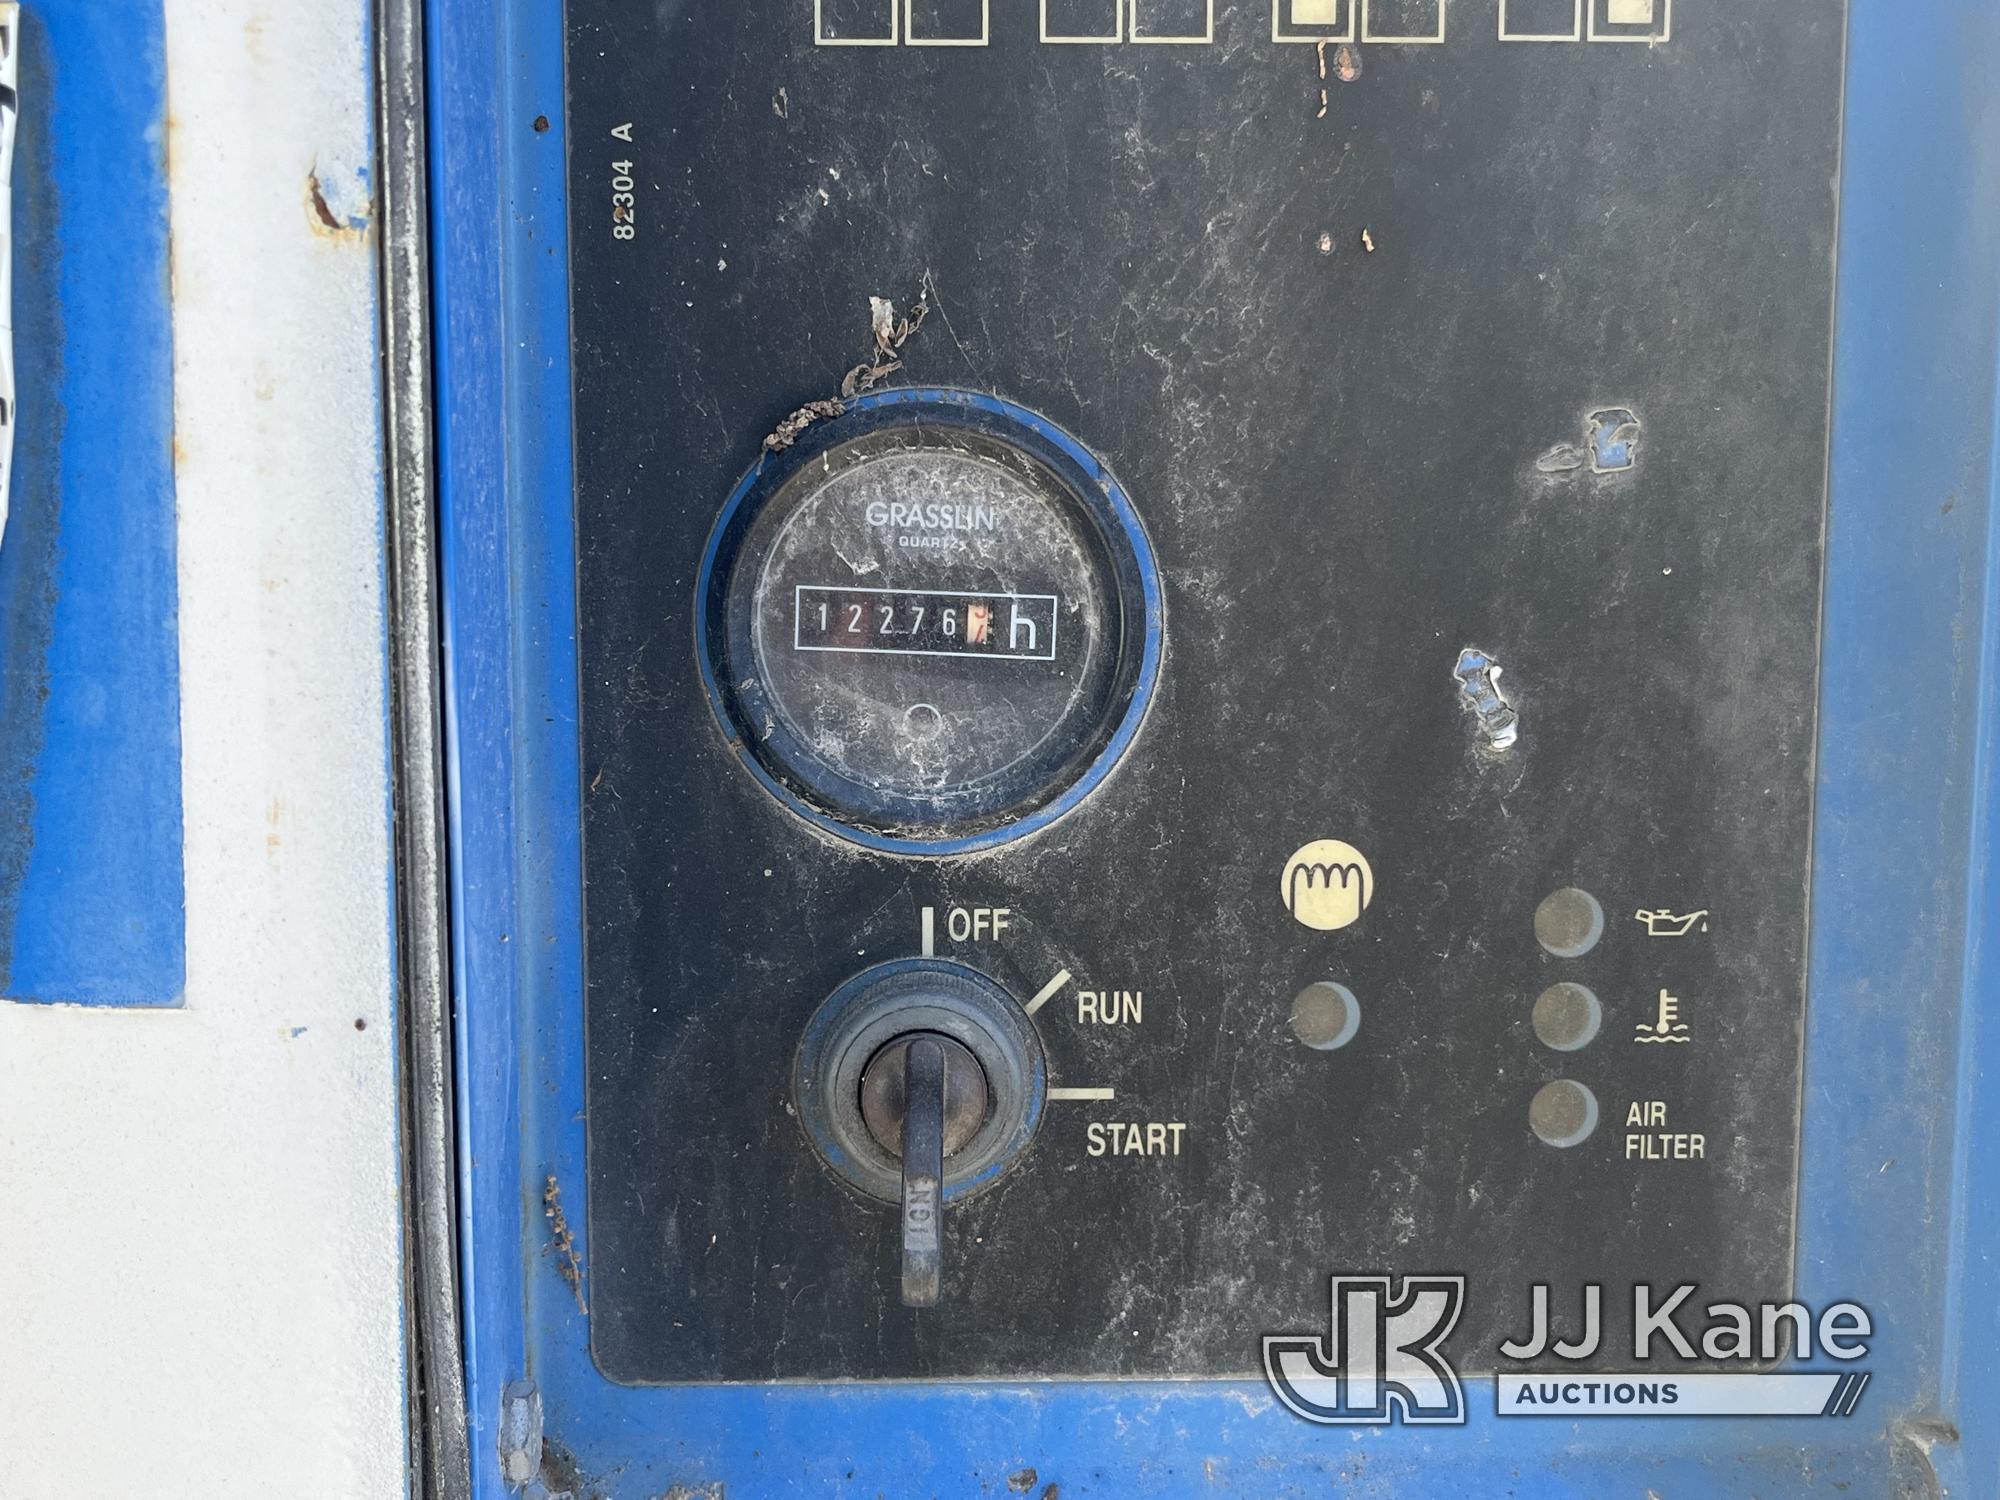 (Leesburg, FL) 2009 Genie TML Portable Light Tower Not Running, Condition Unknown, Data Plate Remove